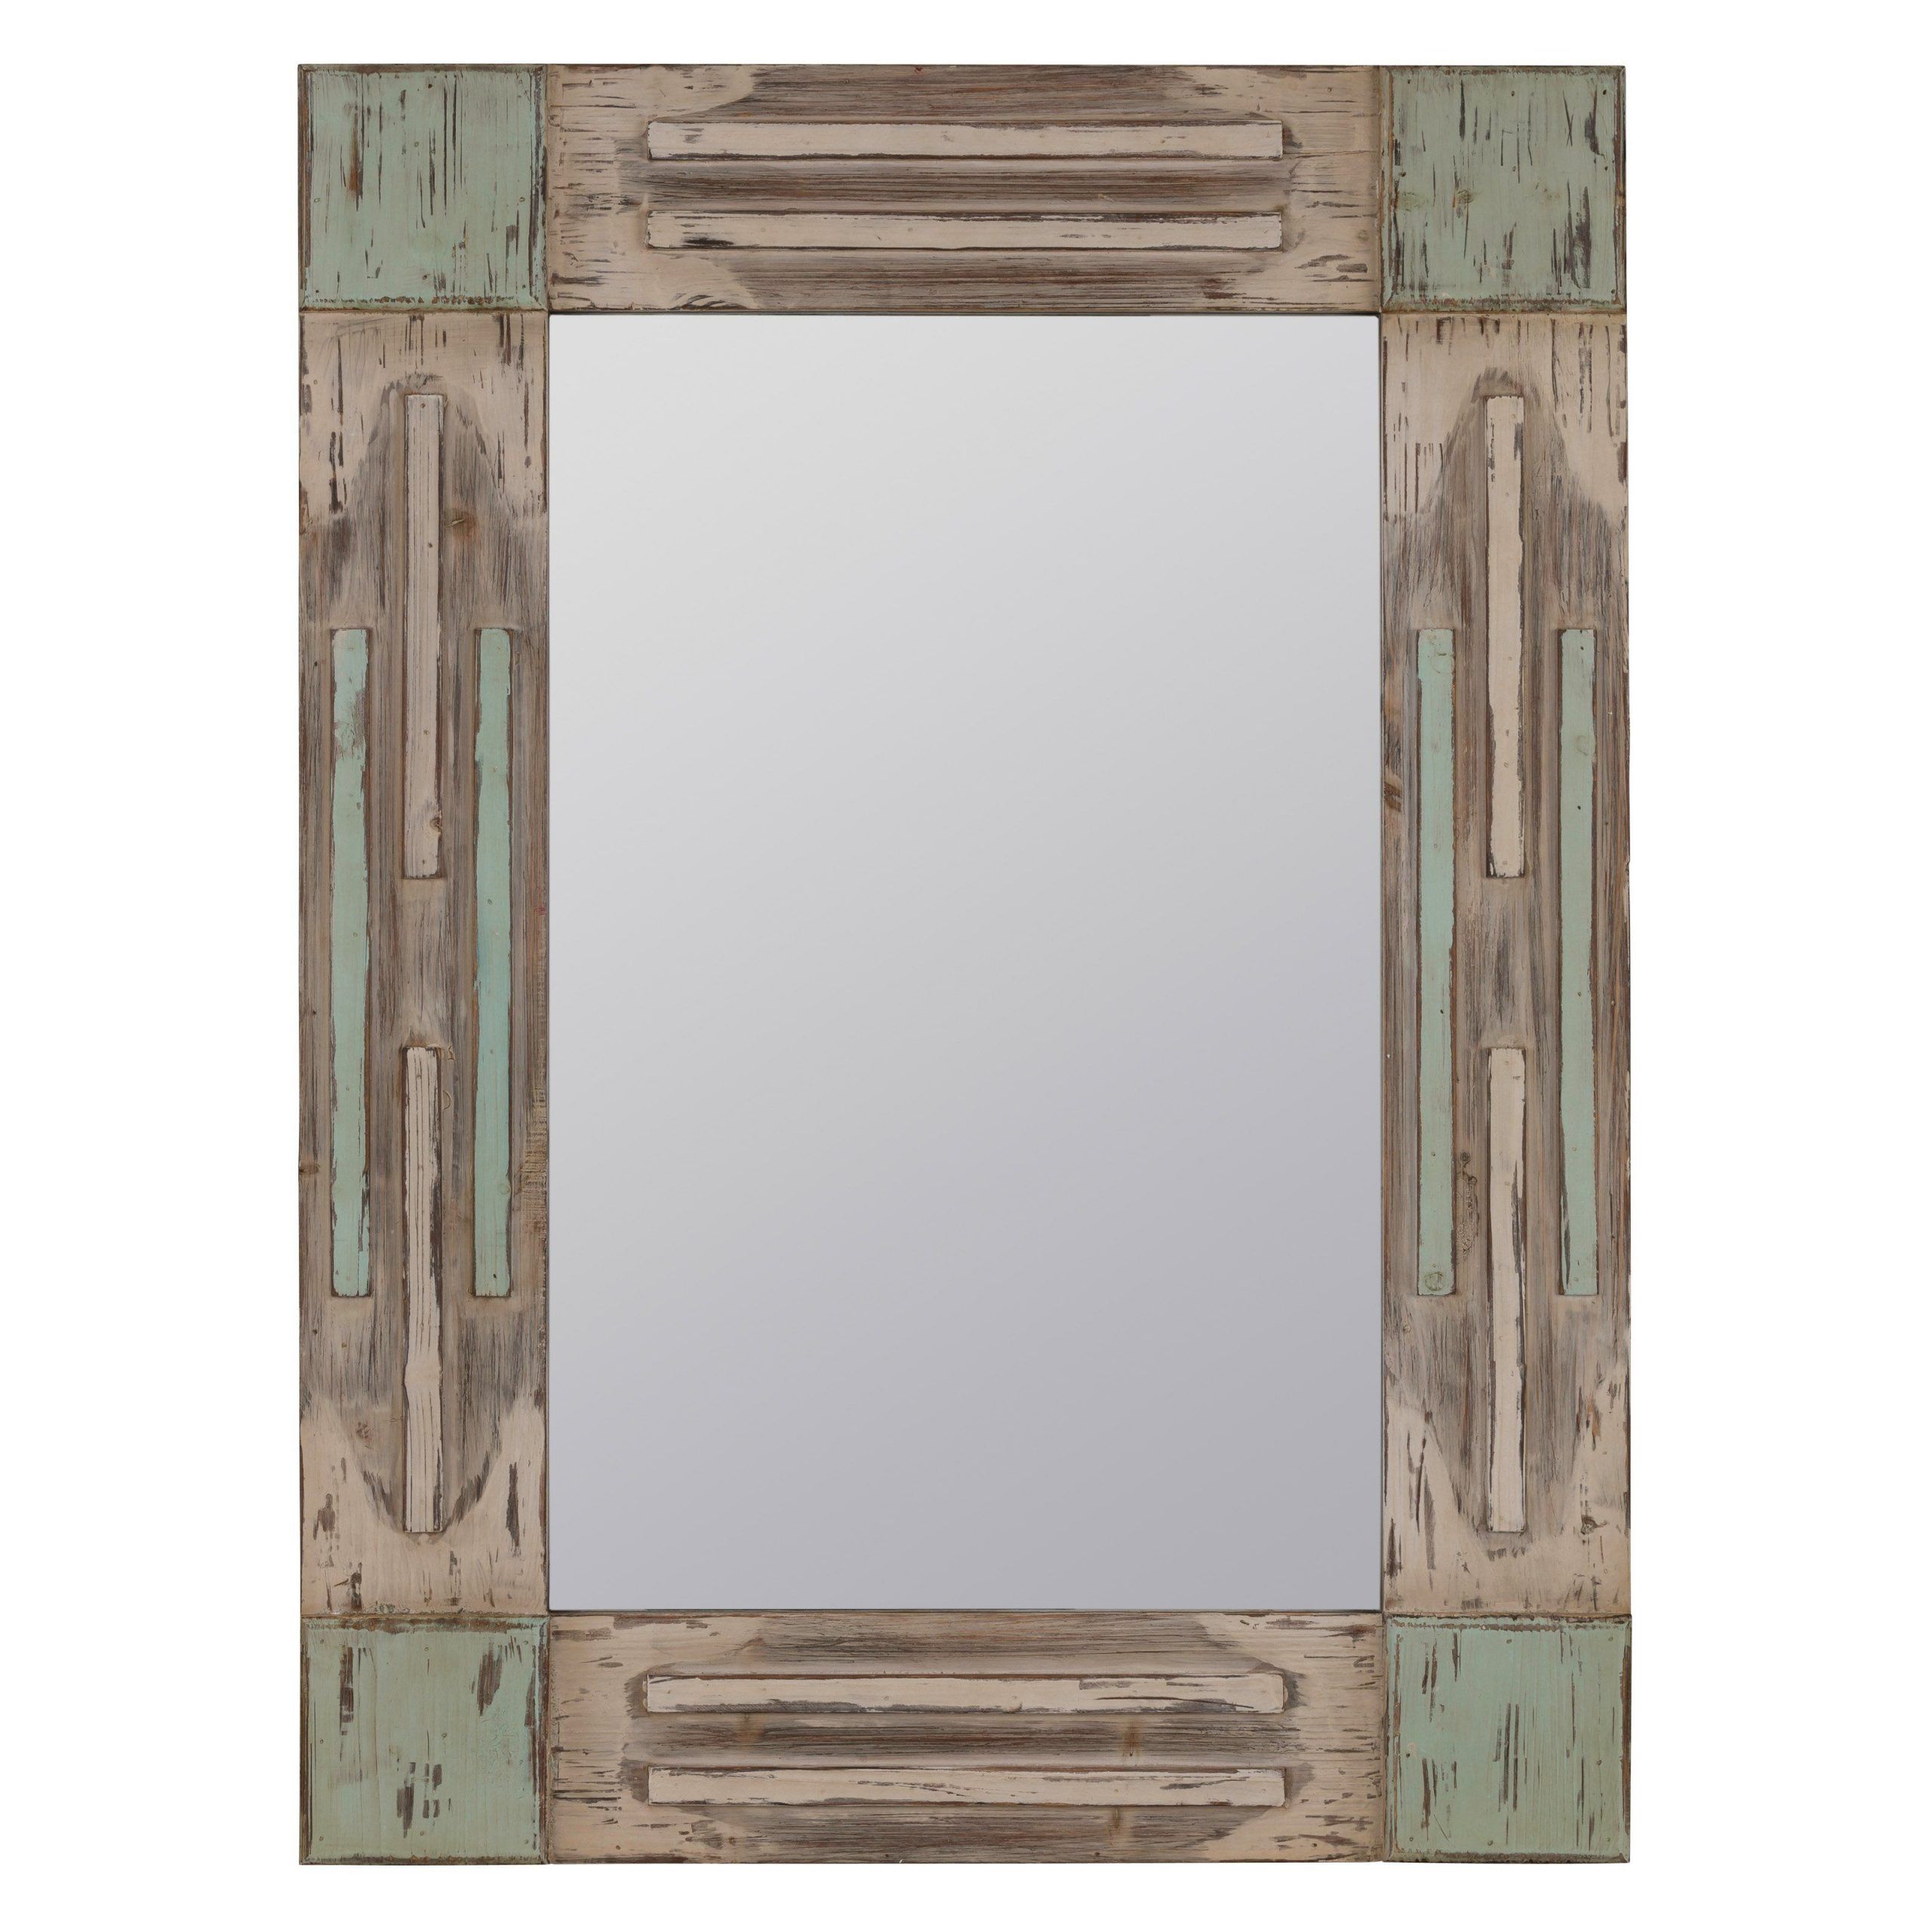 Have To Have It. Cooper Classics Desna Wall Mirror – 31.5w X  (View 8 of 15)